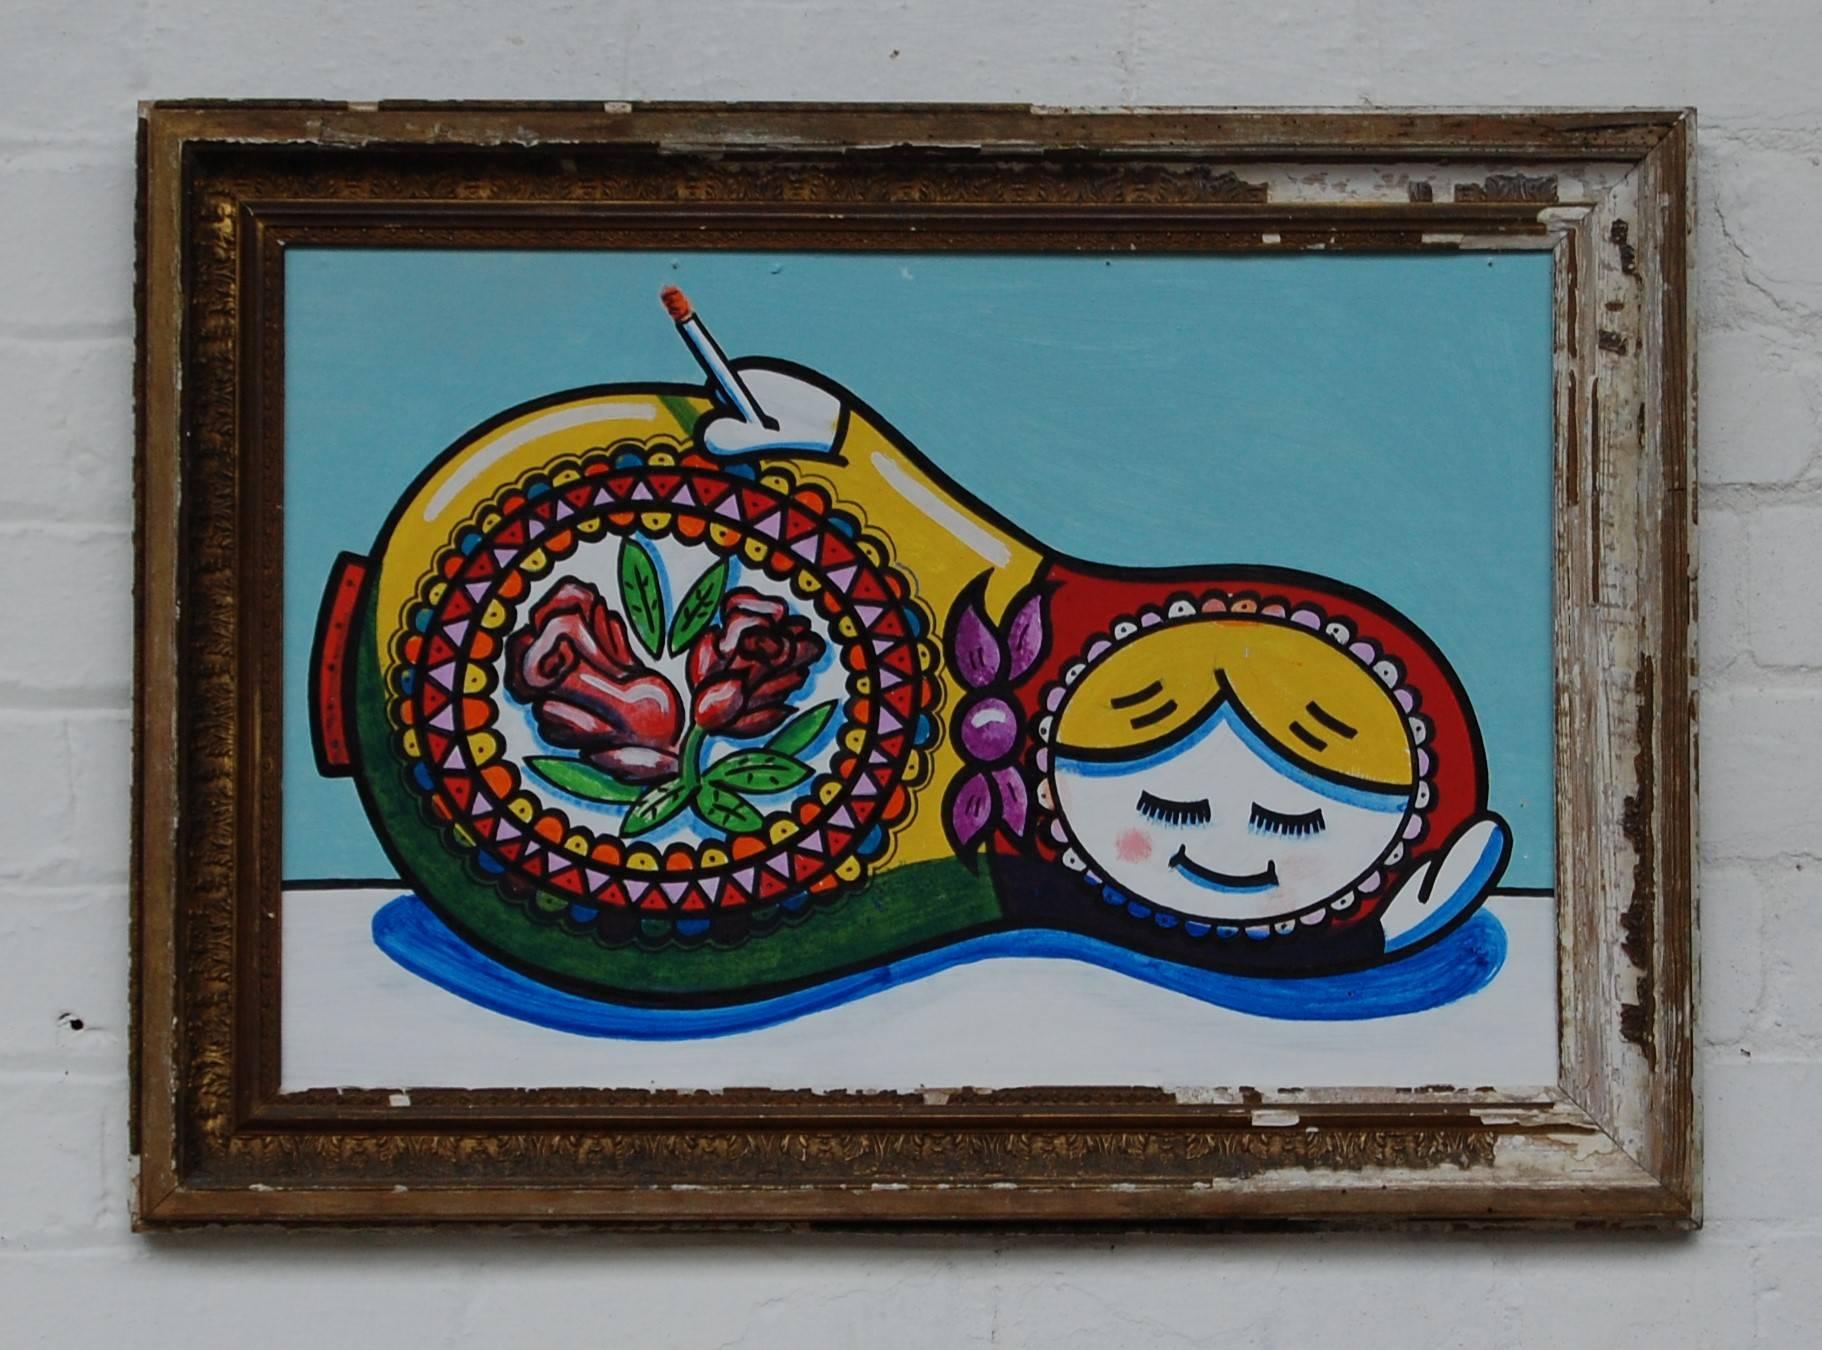 Breaking Tradition, Original, Acrylic Paint on CanvasAntique frame, Russian doll